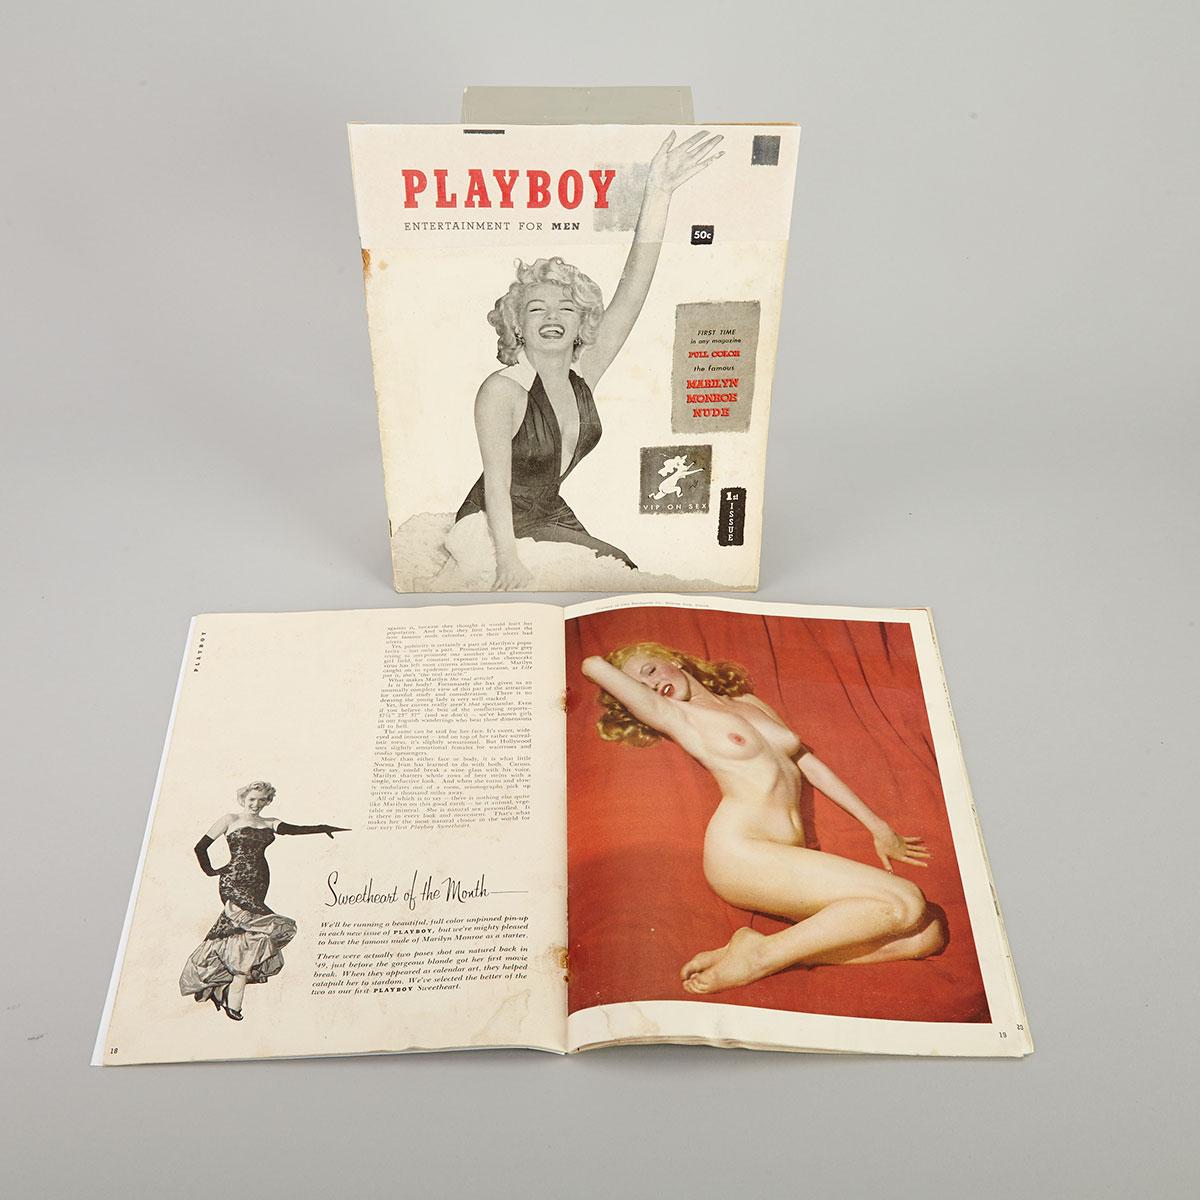 Two Copies Playboy Entertainment for Men, 1st Issue, 1953